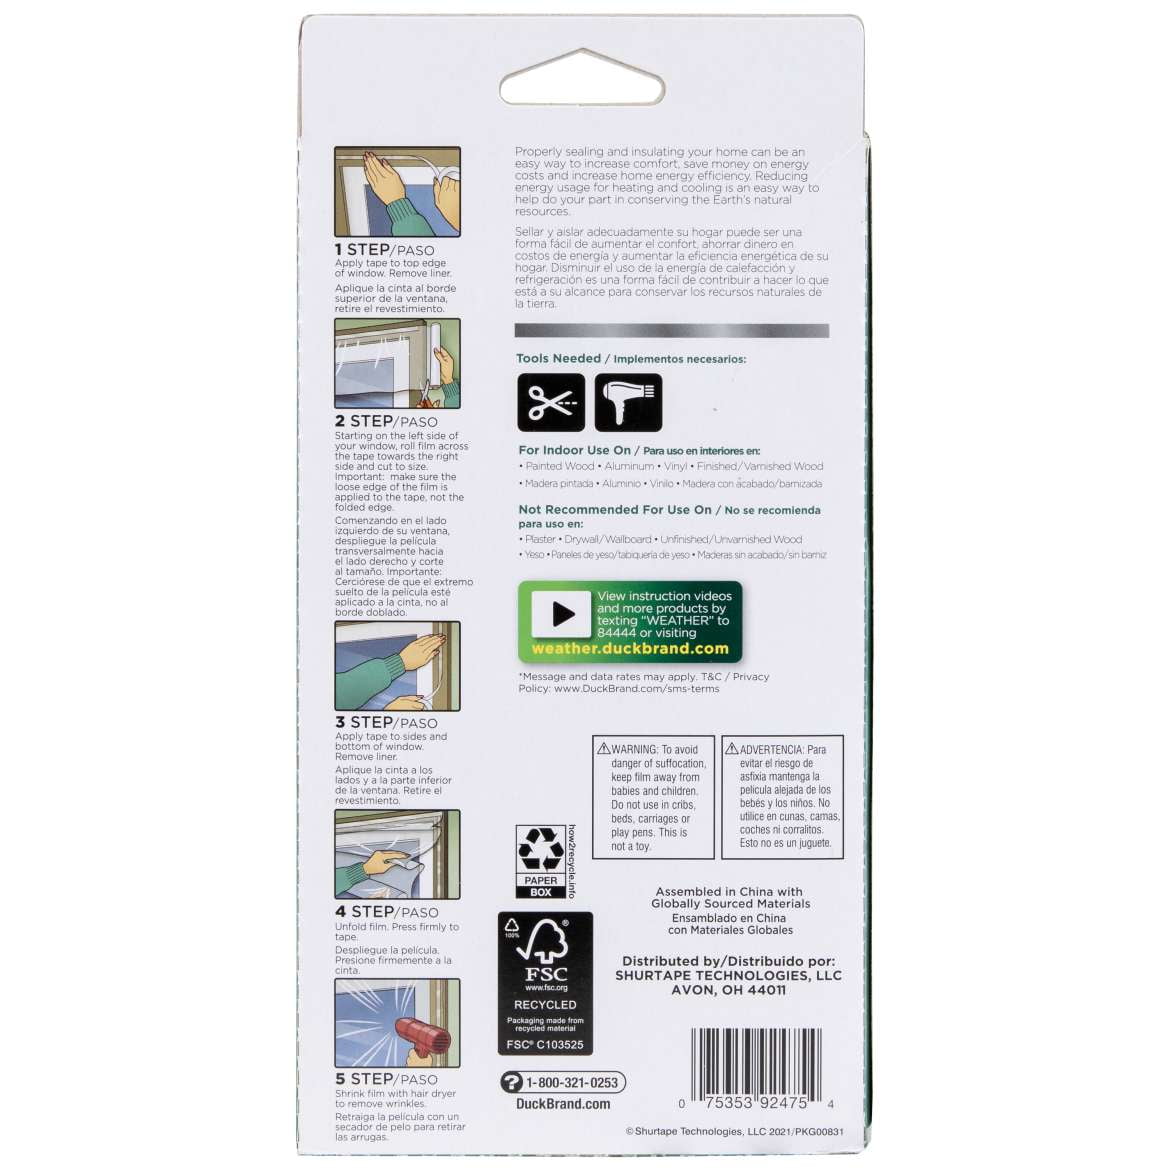 E-Commerce Packaging Clear 62 x 336 Inches Duck Brand Indoor Shrink Film Window Kit 8 Pack 285232 